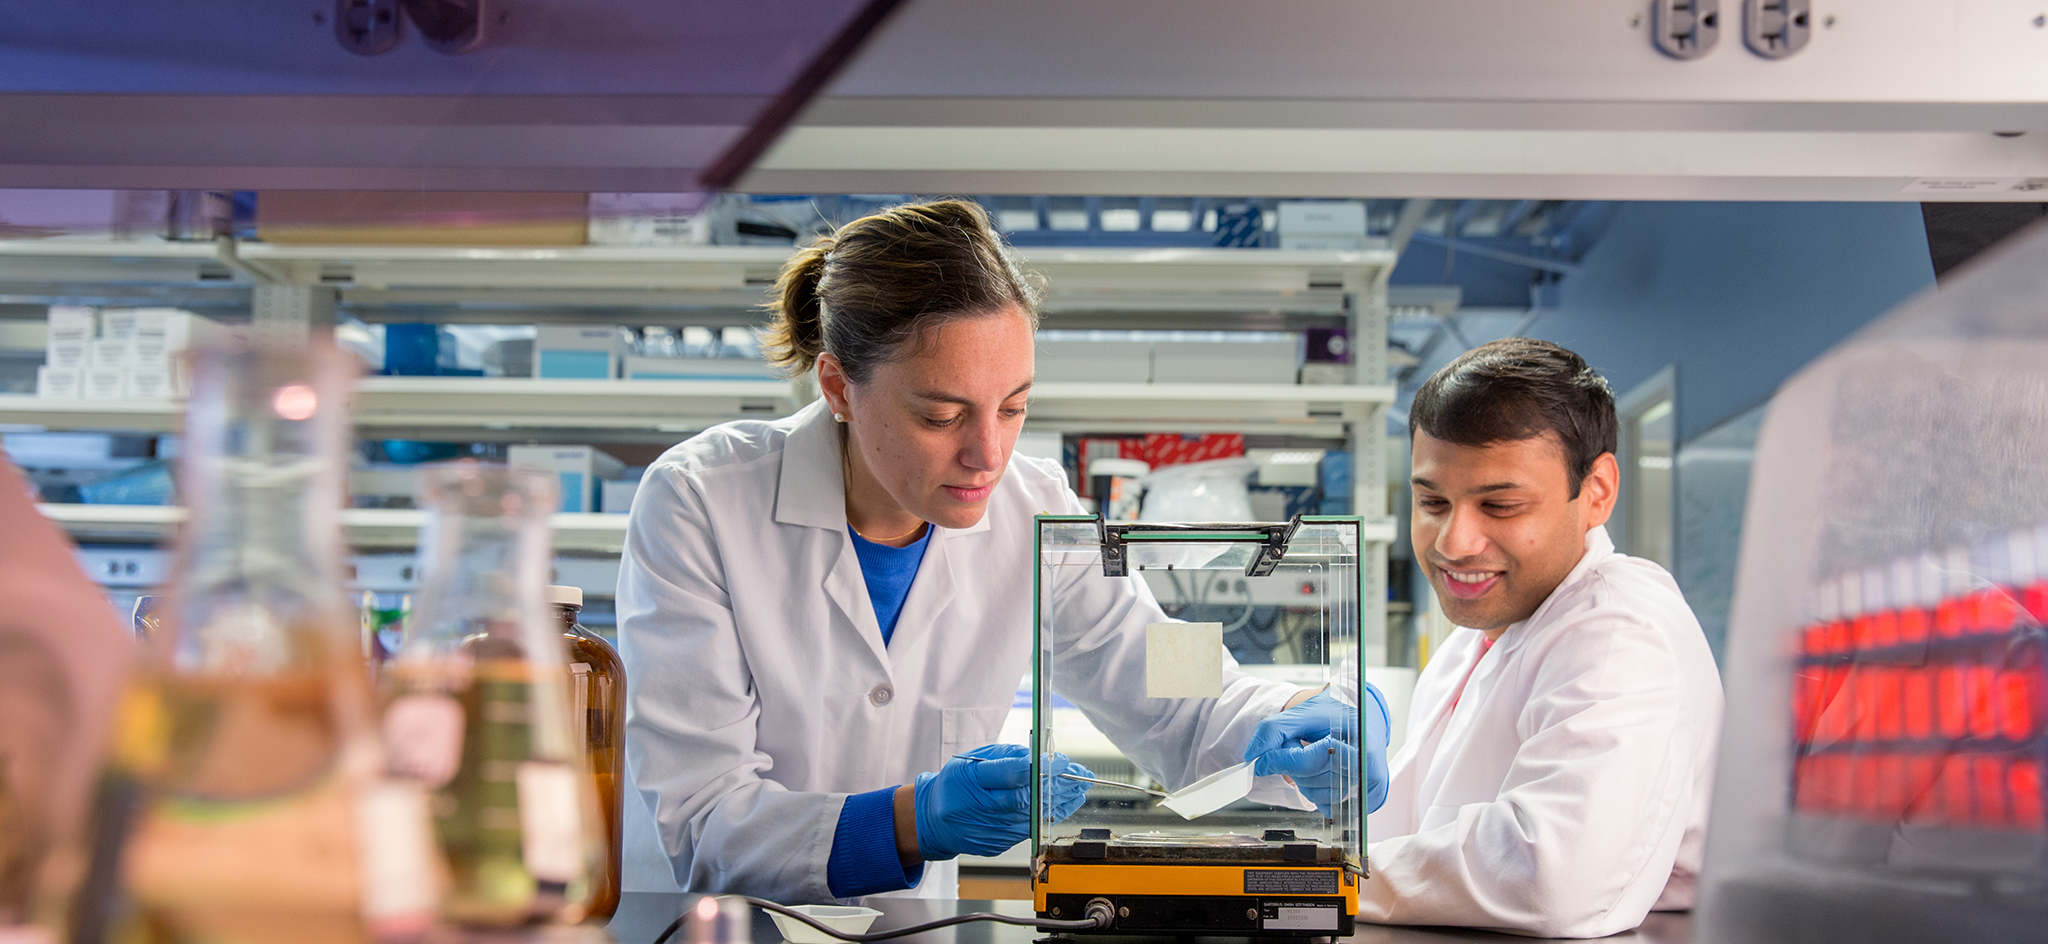 NYMC Graduate School of Biomedical Sciences - Apply now to start in the fall. Read more »